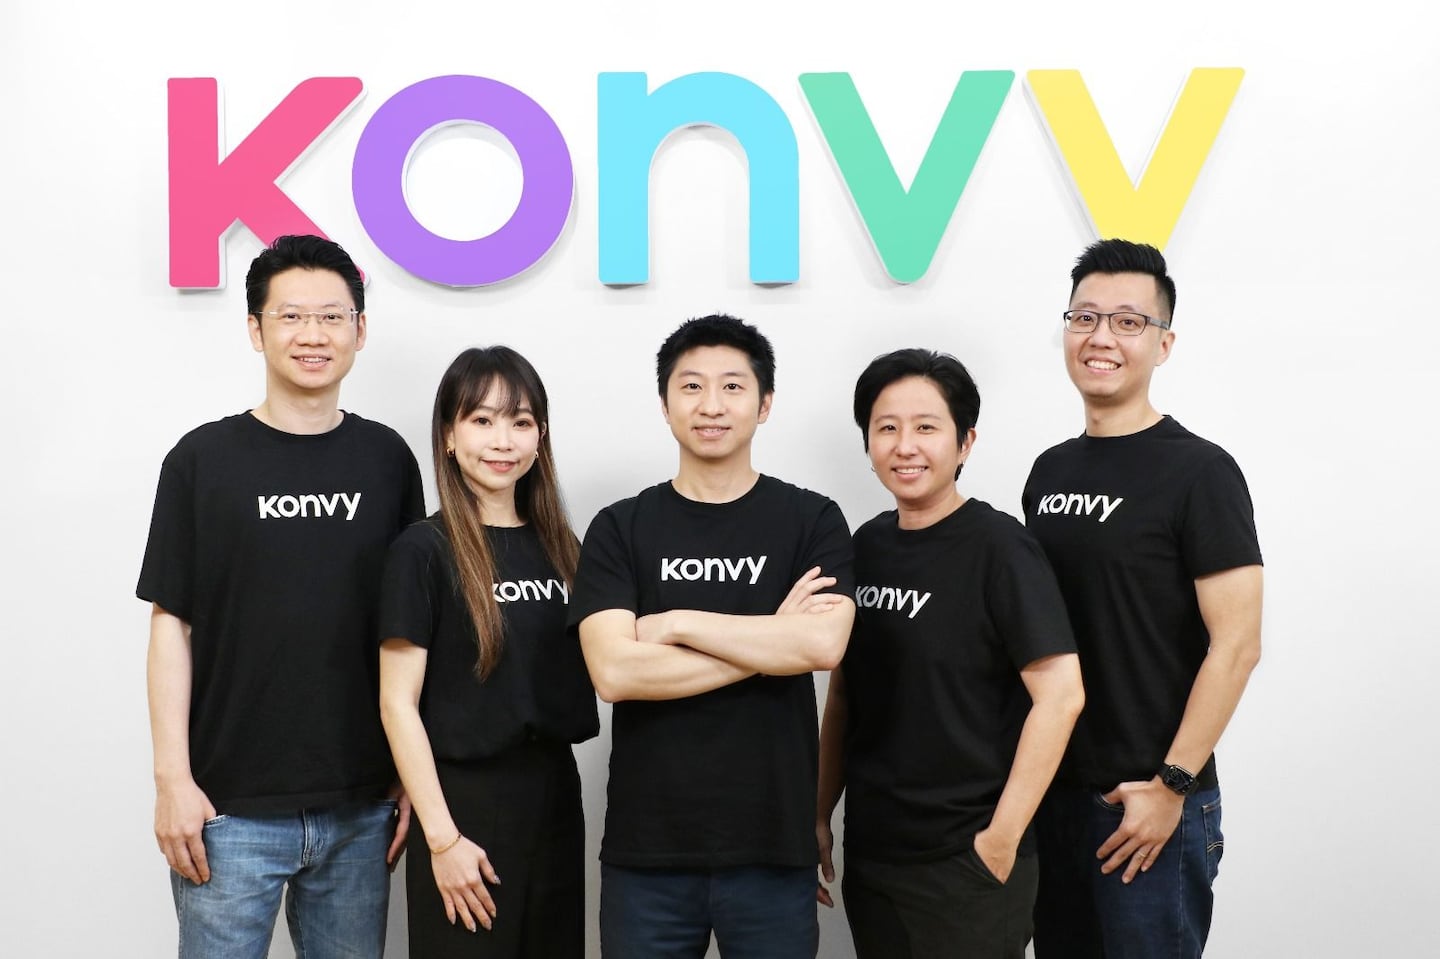 Thai multi-brand beauty retailer Konvy executives, from left to right: Leon Huang (CFO & co-founder), Mia Chou (e-commerce director), QingGui Huang (CEO & co-founder), Pornsuda Vangvidhayakul (managing partner), JC Chen (CCO).